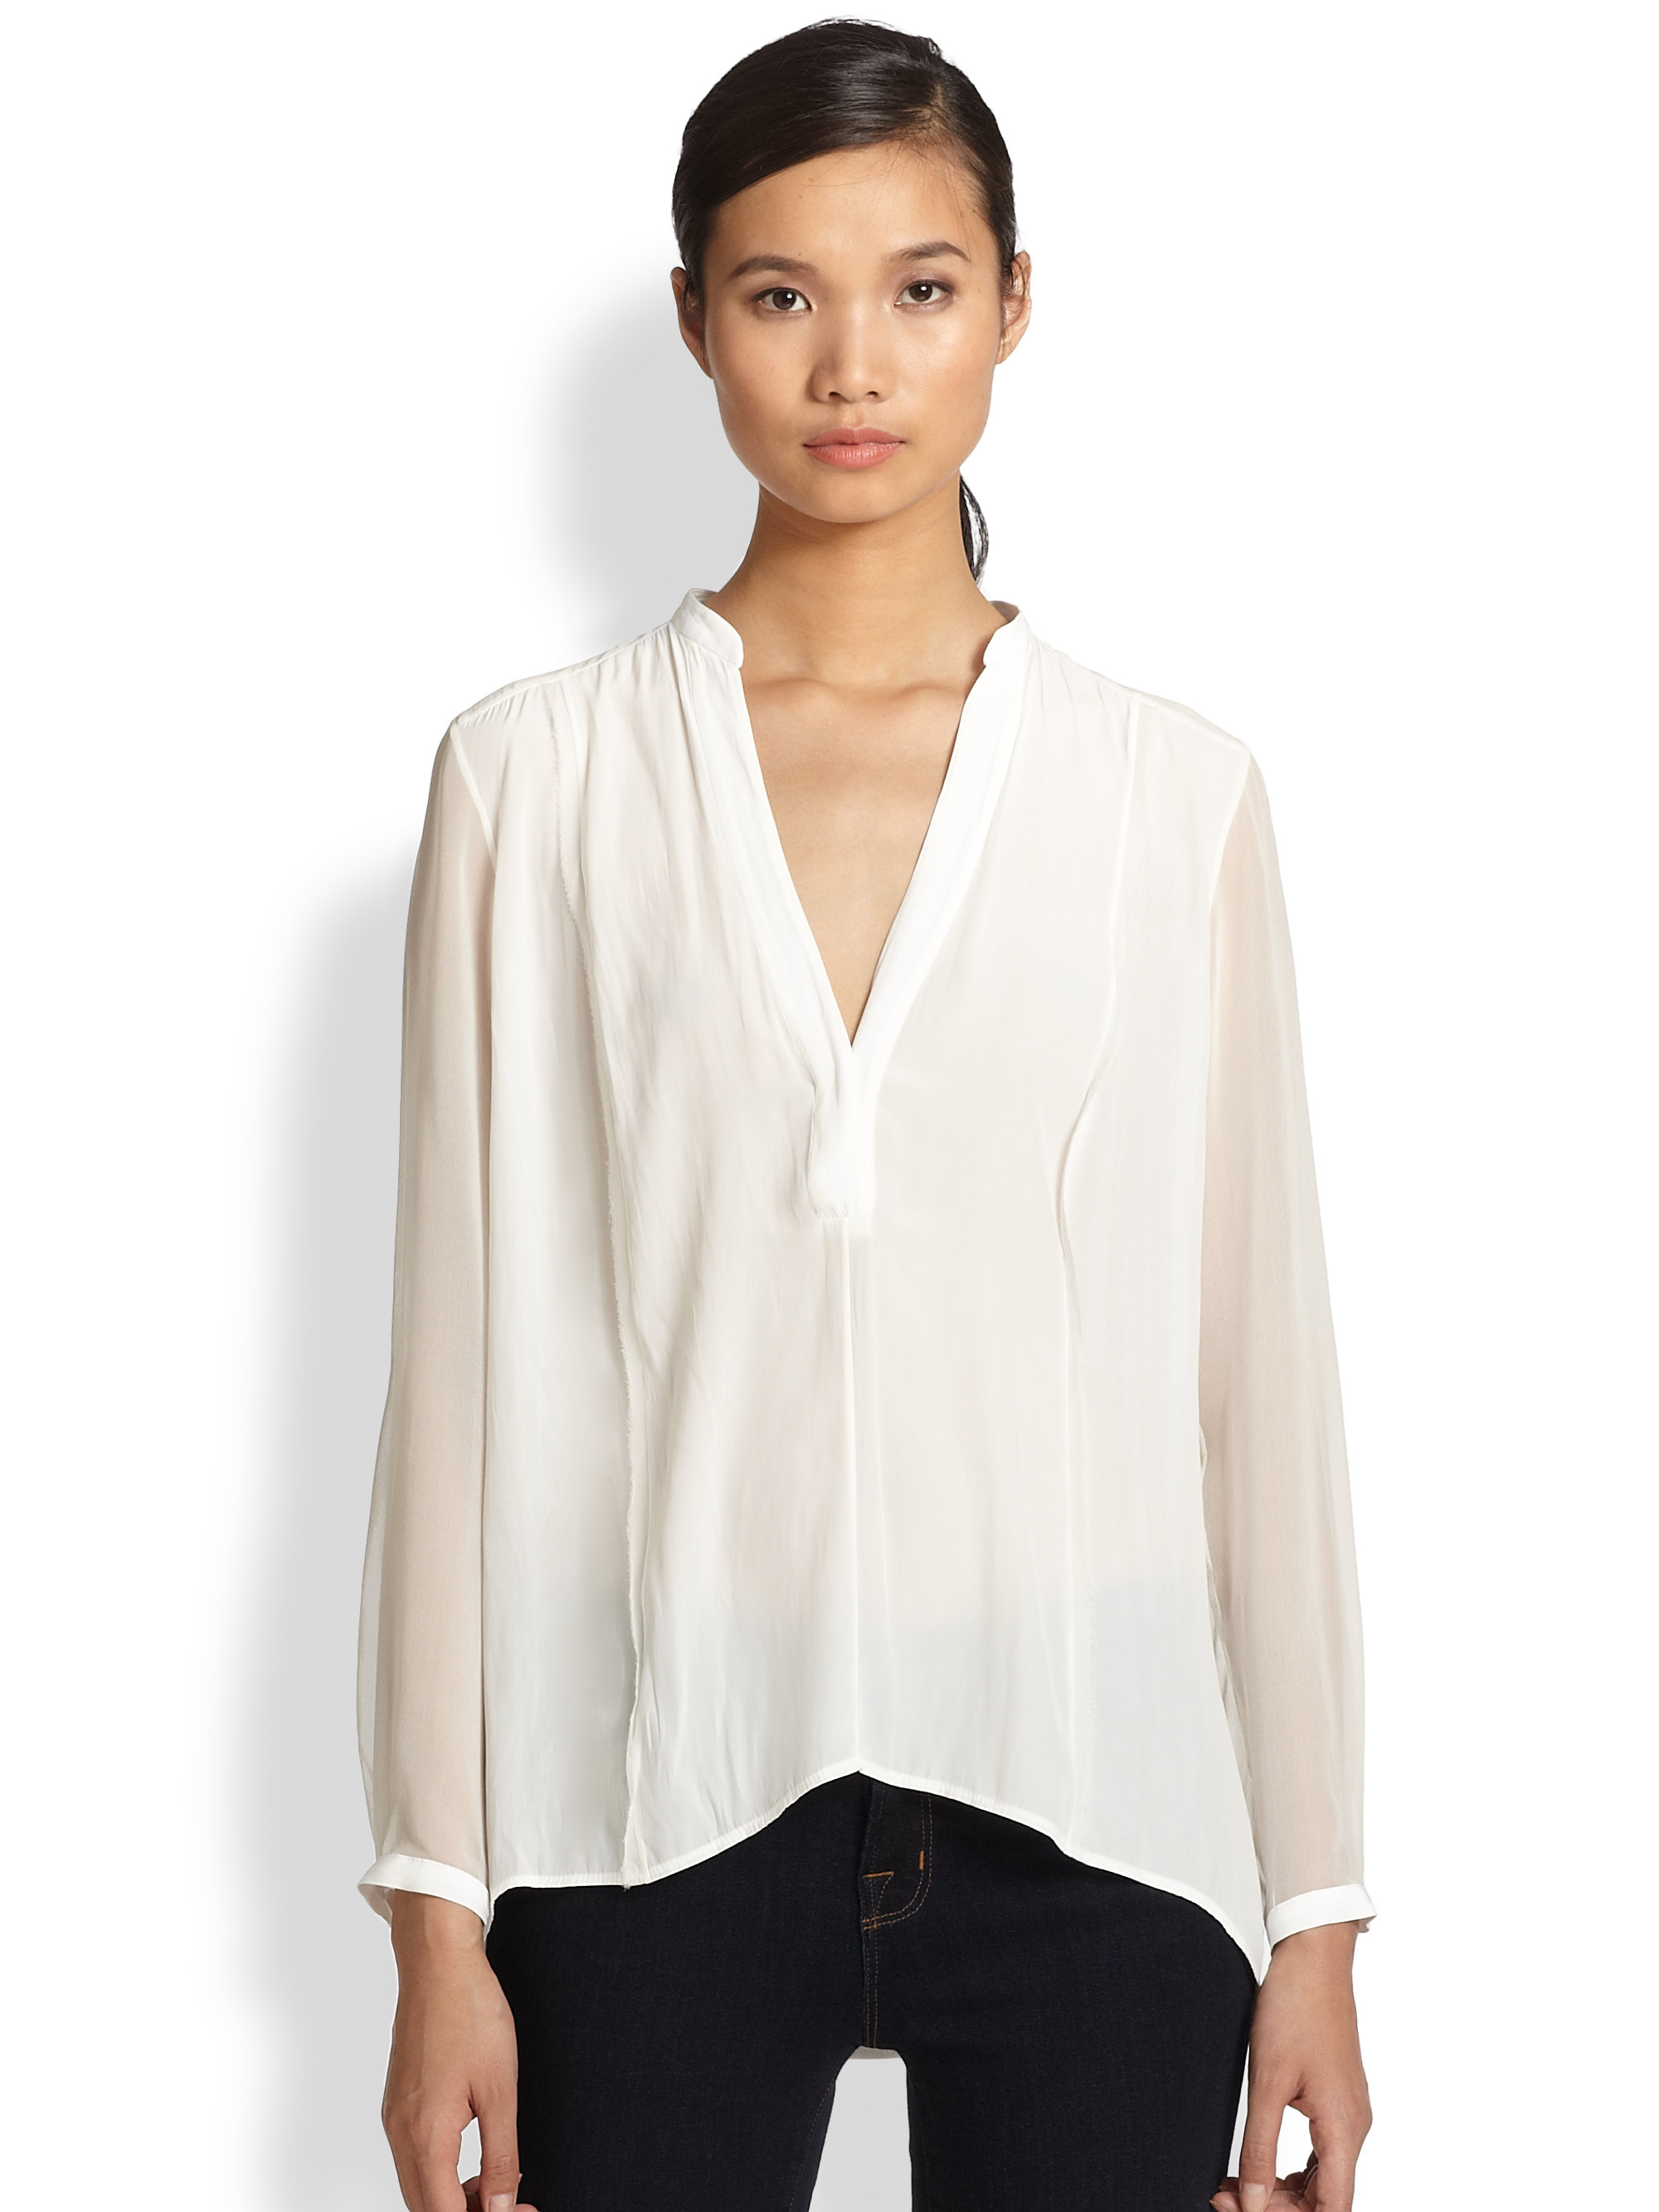 Elizabeth And James Betie Silksleeved Trapeze Blouse in White